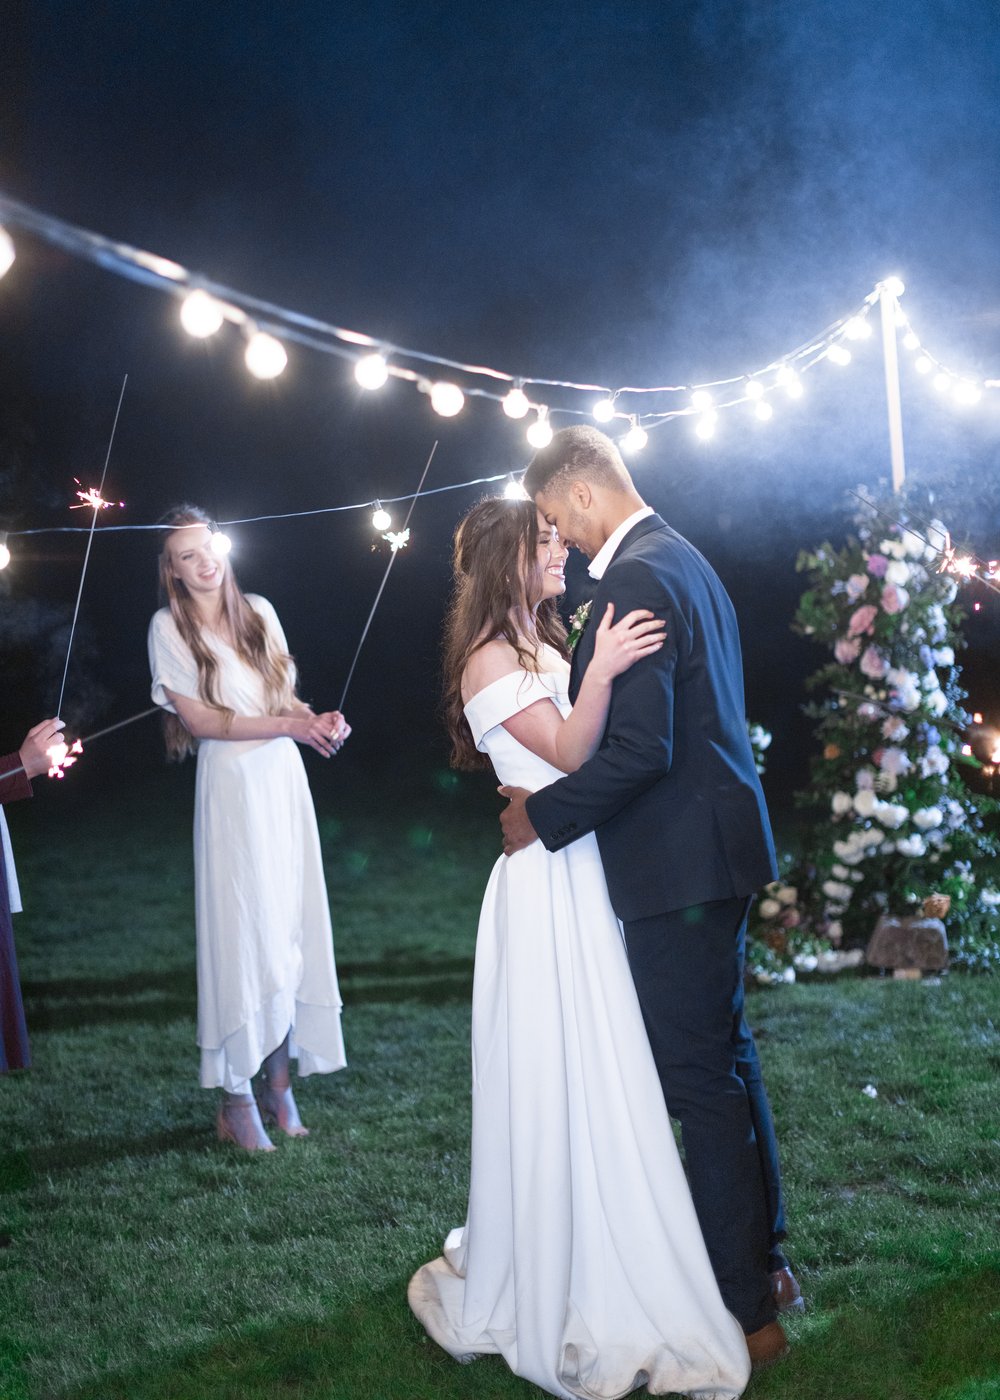  Photography tips on how to photograph sparkler wedding send-offs by Professional Savanna Richardson Photography. sparkler send off photography education for wedding professionals #SavannaRichardsonPhotography #SavannaRichardsonTips #WeddingExits #Ph